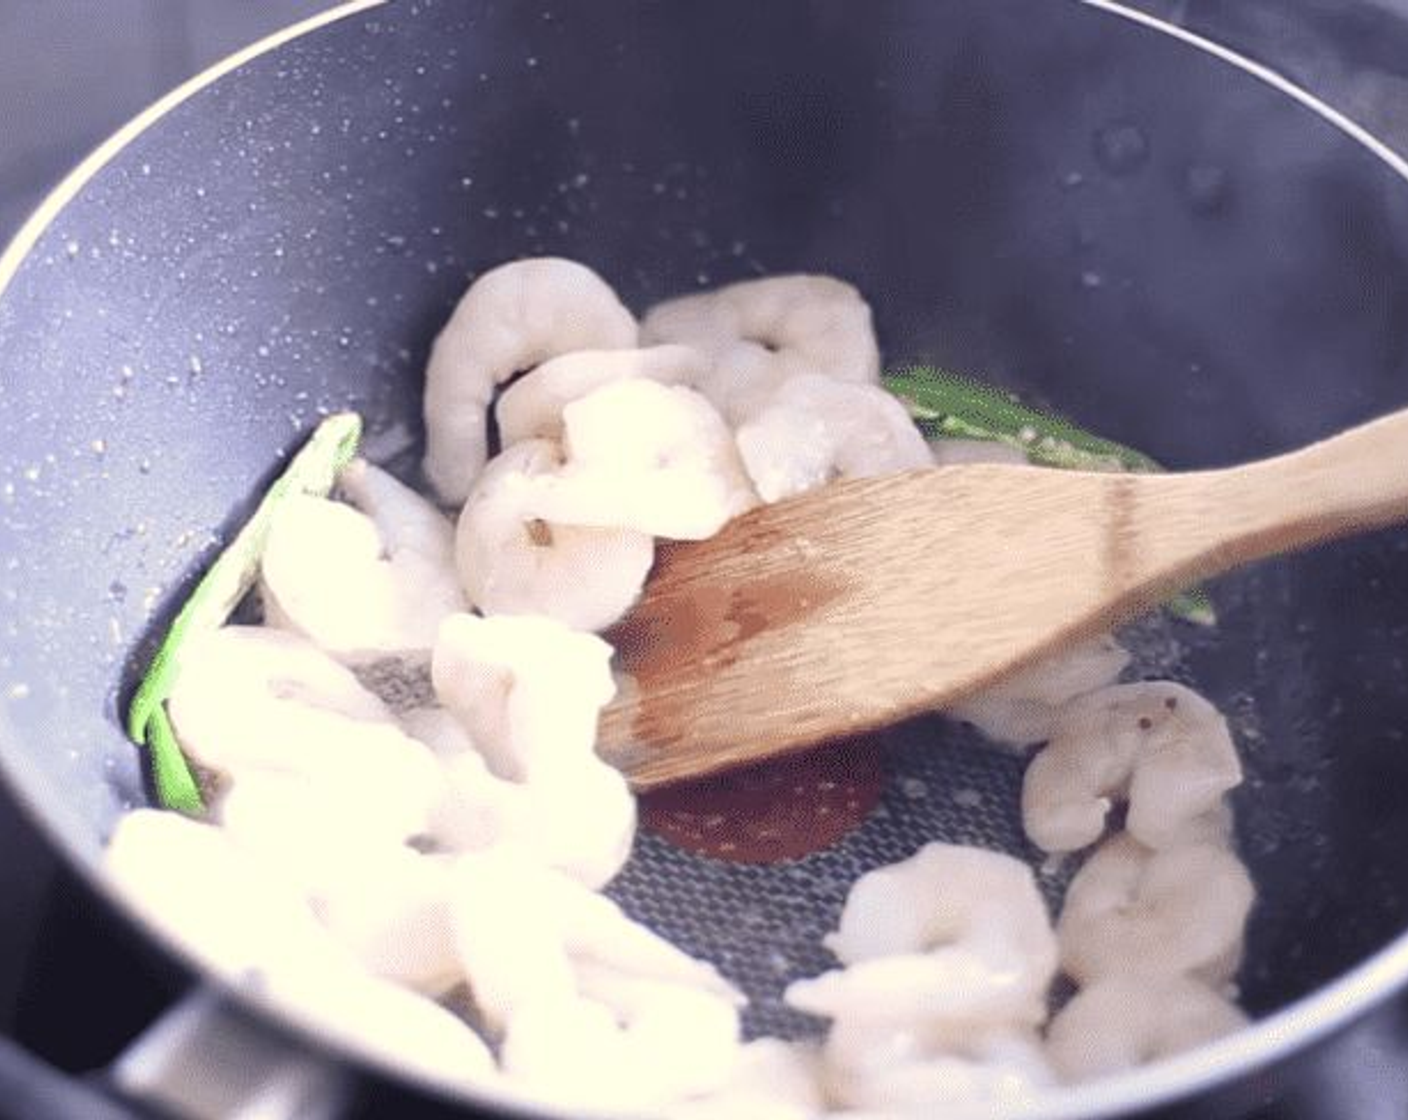 step 3 In a deep pan, heat up Coconut Oil (1 Tbsp) until melted, then add Mustard Seeds (1/4 tsp), Green Chili Peppers (2), Curry Leaf (1), King Prawns (1.1 lb) and Asafoetida (3/4 tsp).